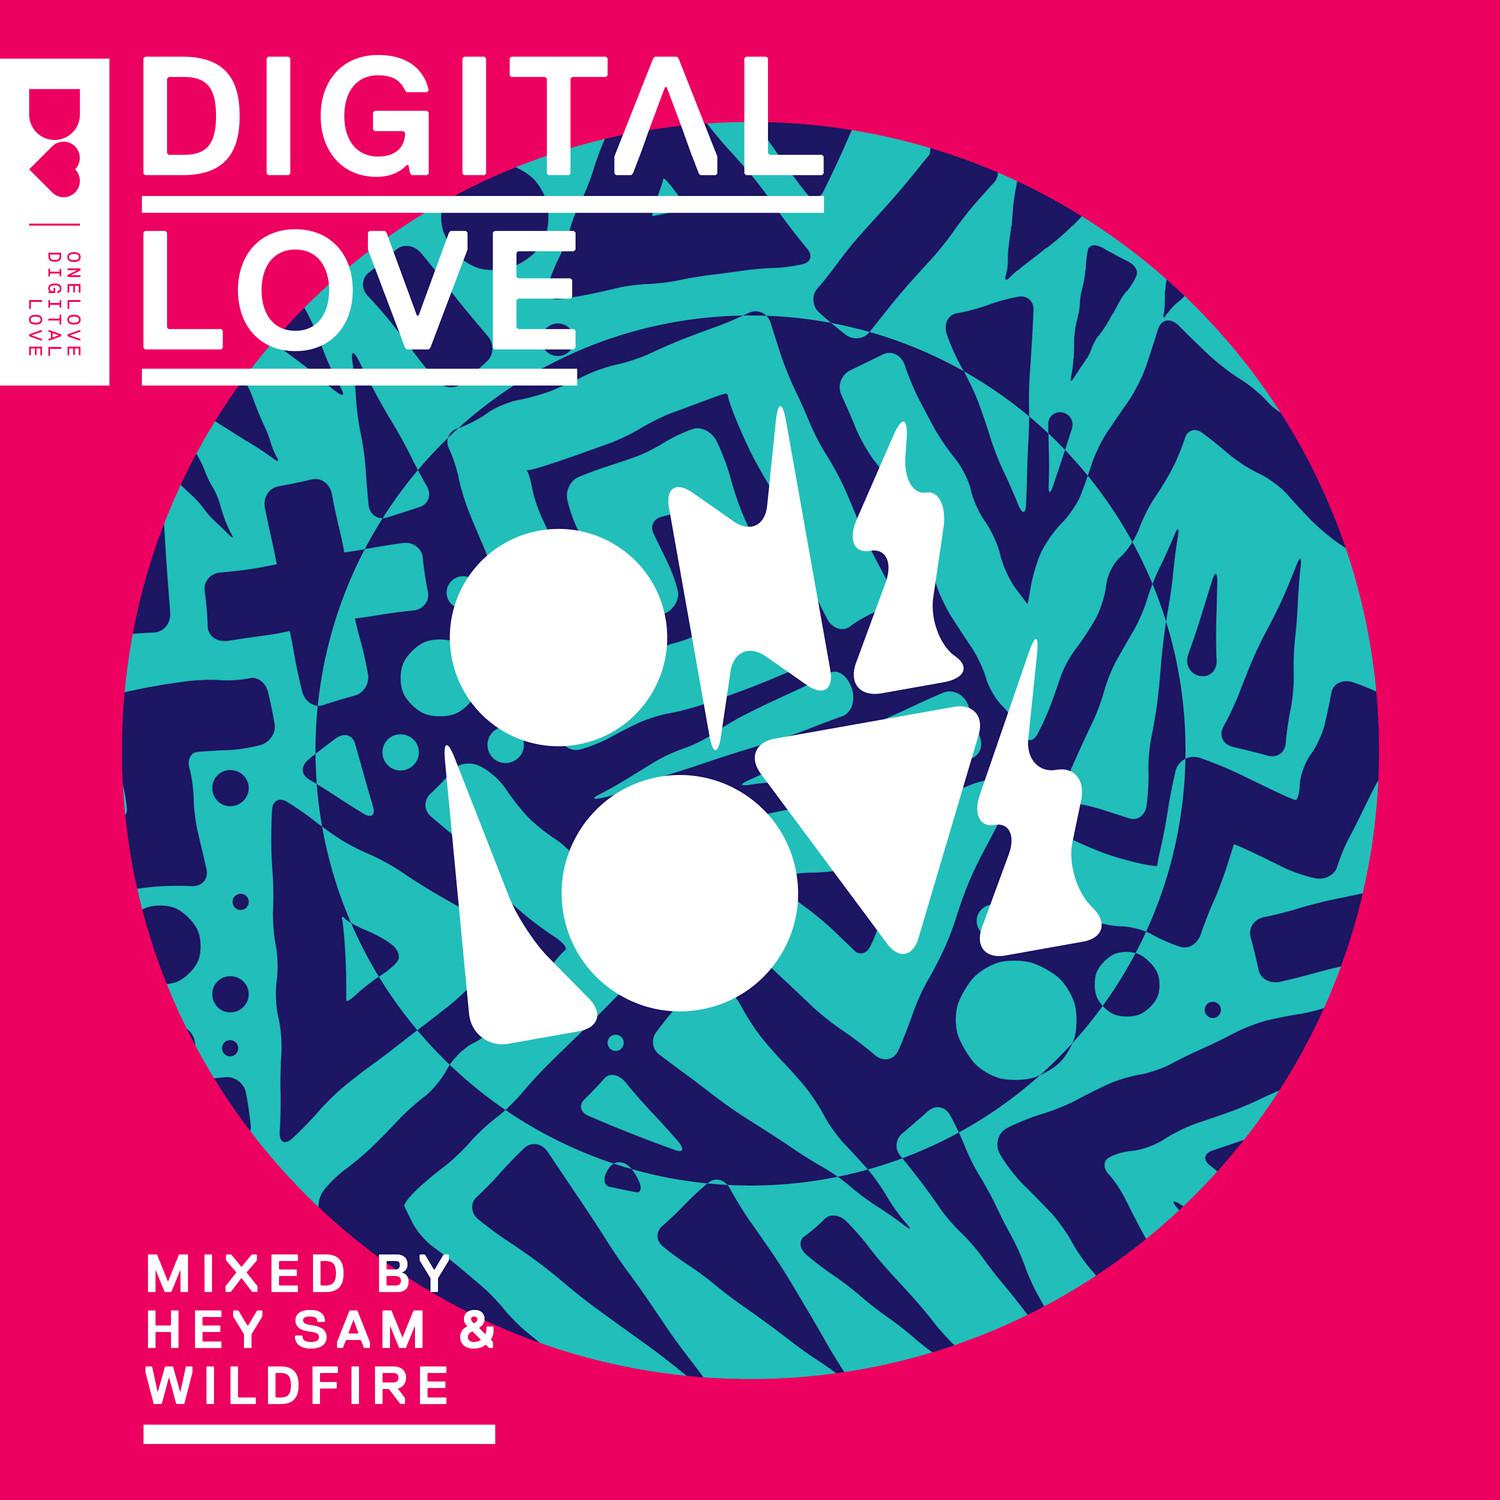 Onelove Digital Love (Mixed by Hey Sam & Wildfire)